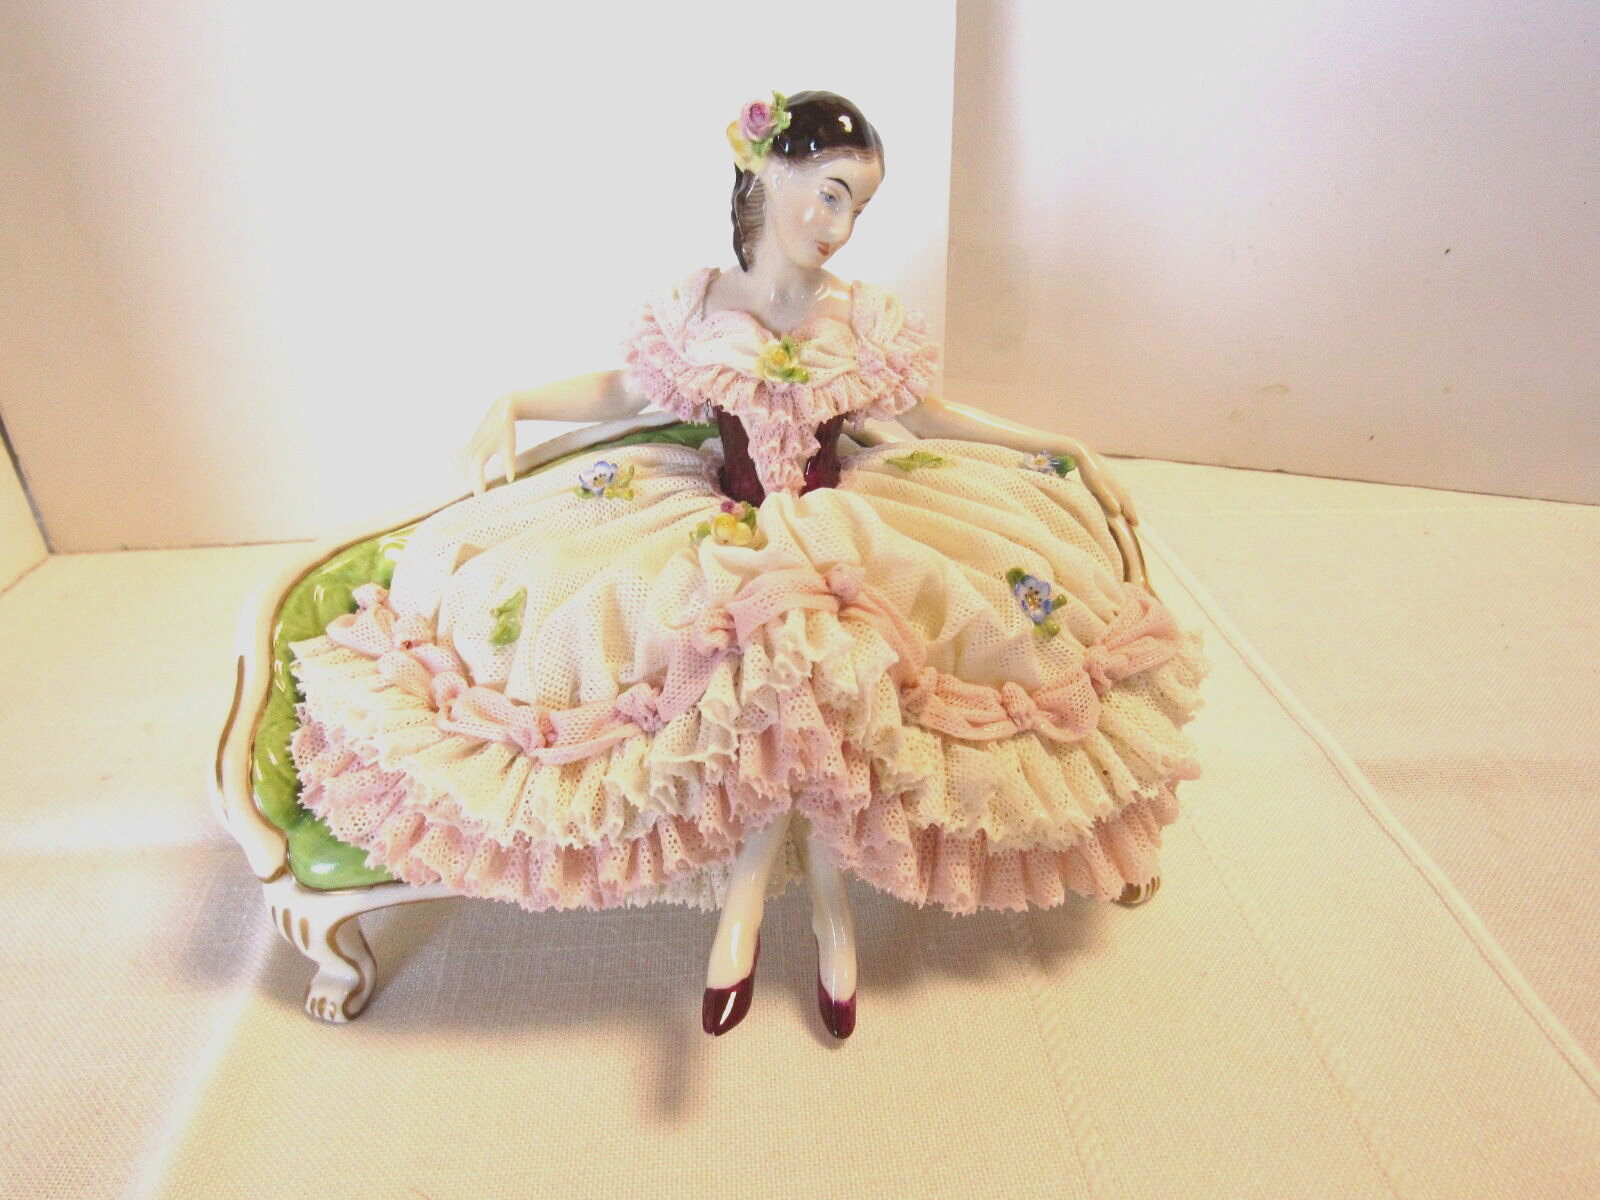 VINTAGE VOLKSTEDT DRESDEN LACE FIGURE LADY ON COUCH NEAR MINT CONDITION